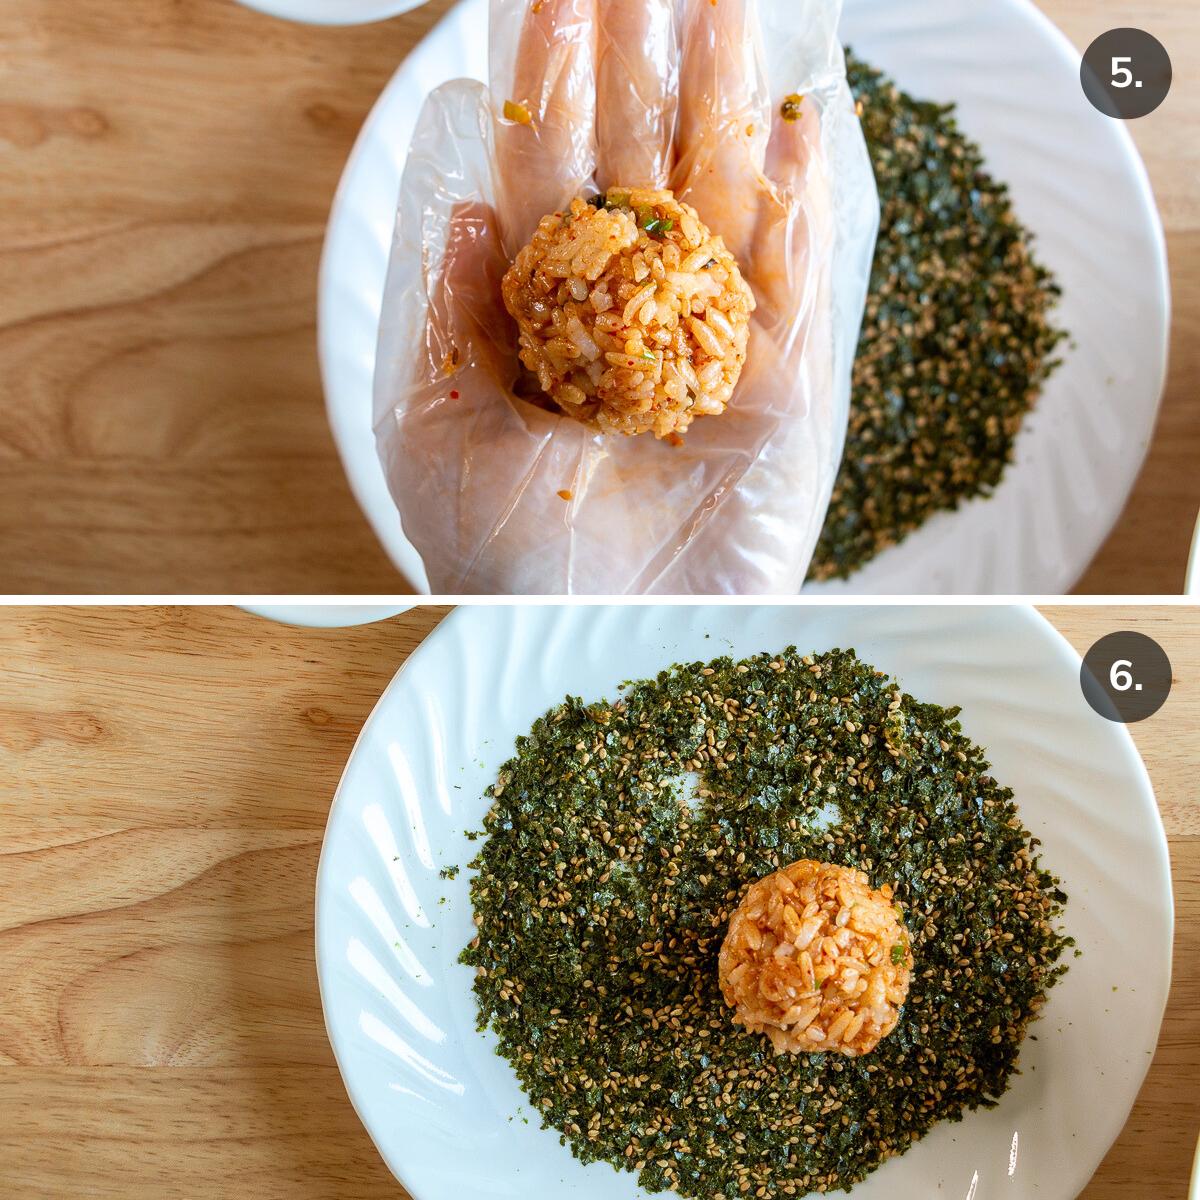 Rolled Kimchi rice ball in a gloved hand ready to cover in the homemade nori furikake.